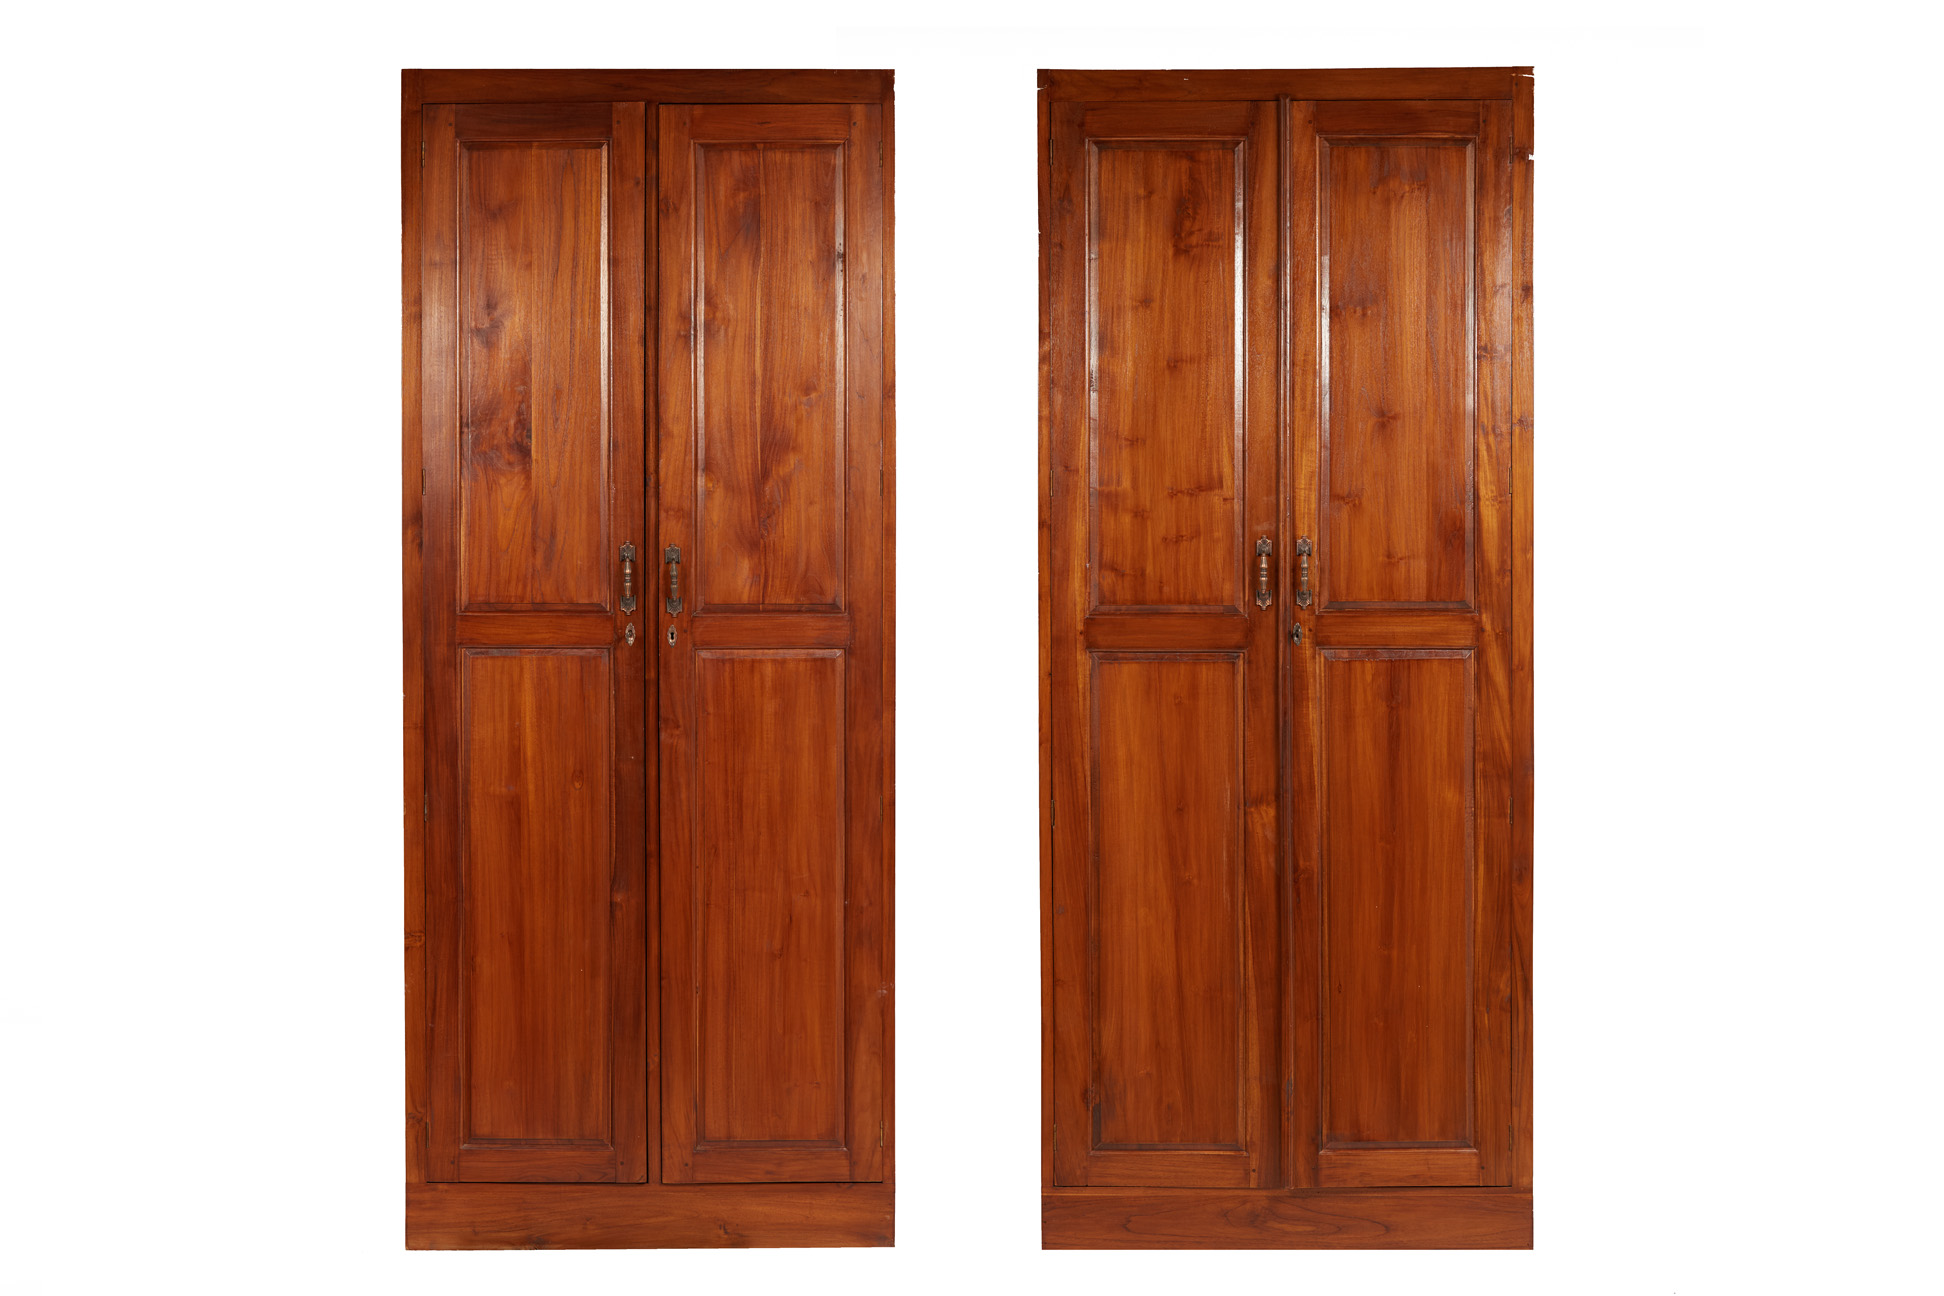 A PAIR OF LARGE PANELLED WARDROBES